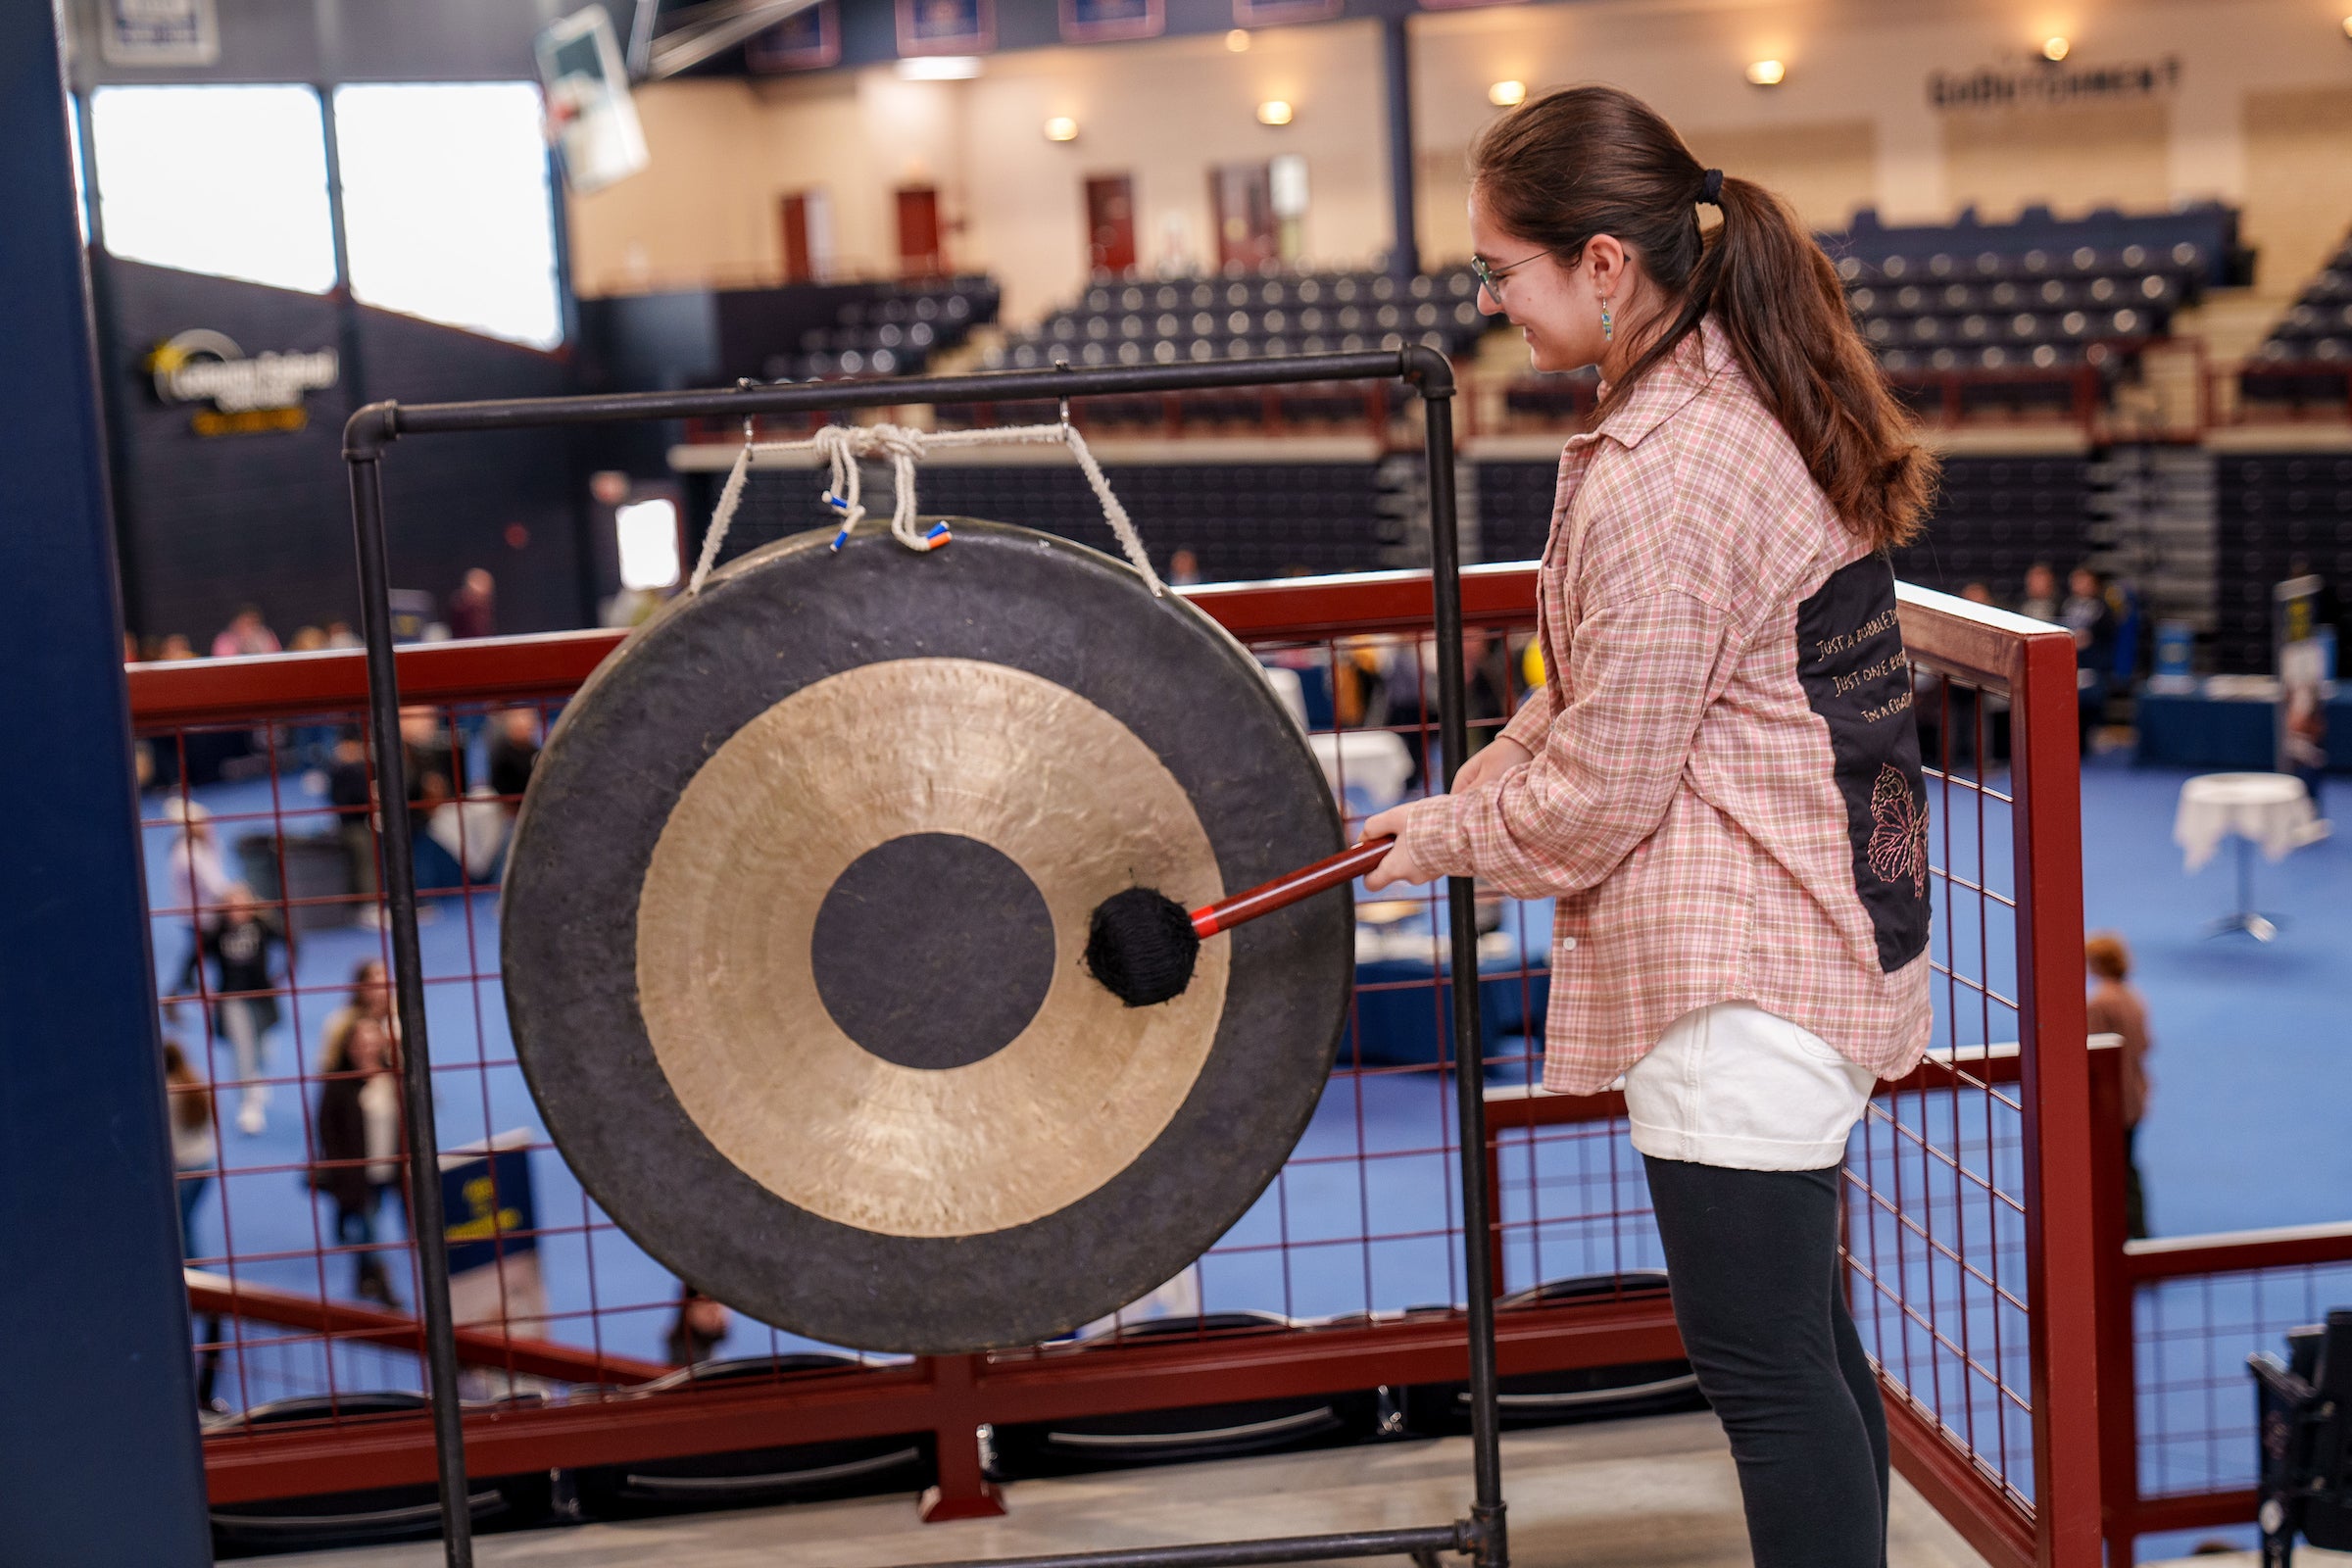 Accepted student rings gong at campus event after choosing to enroll at LVC